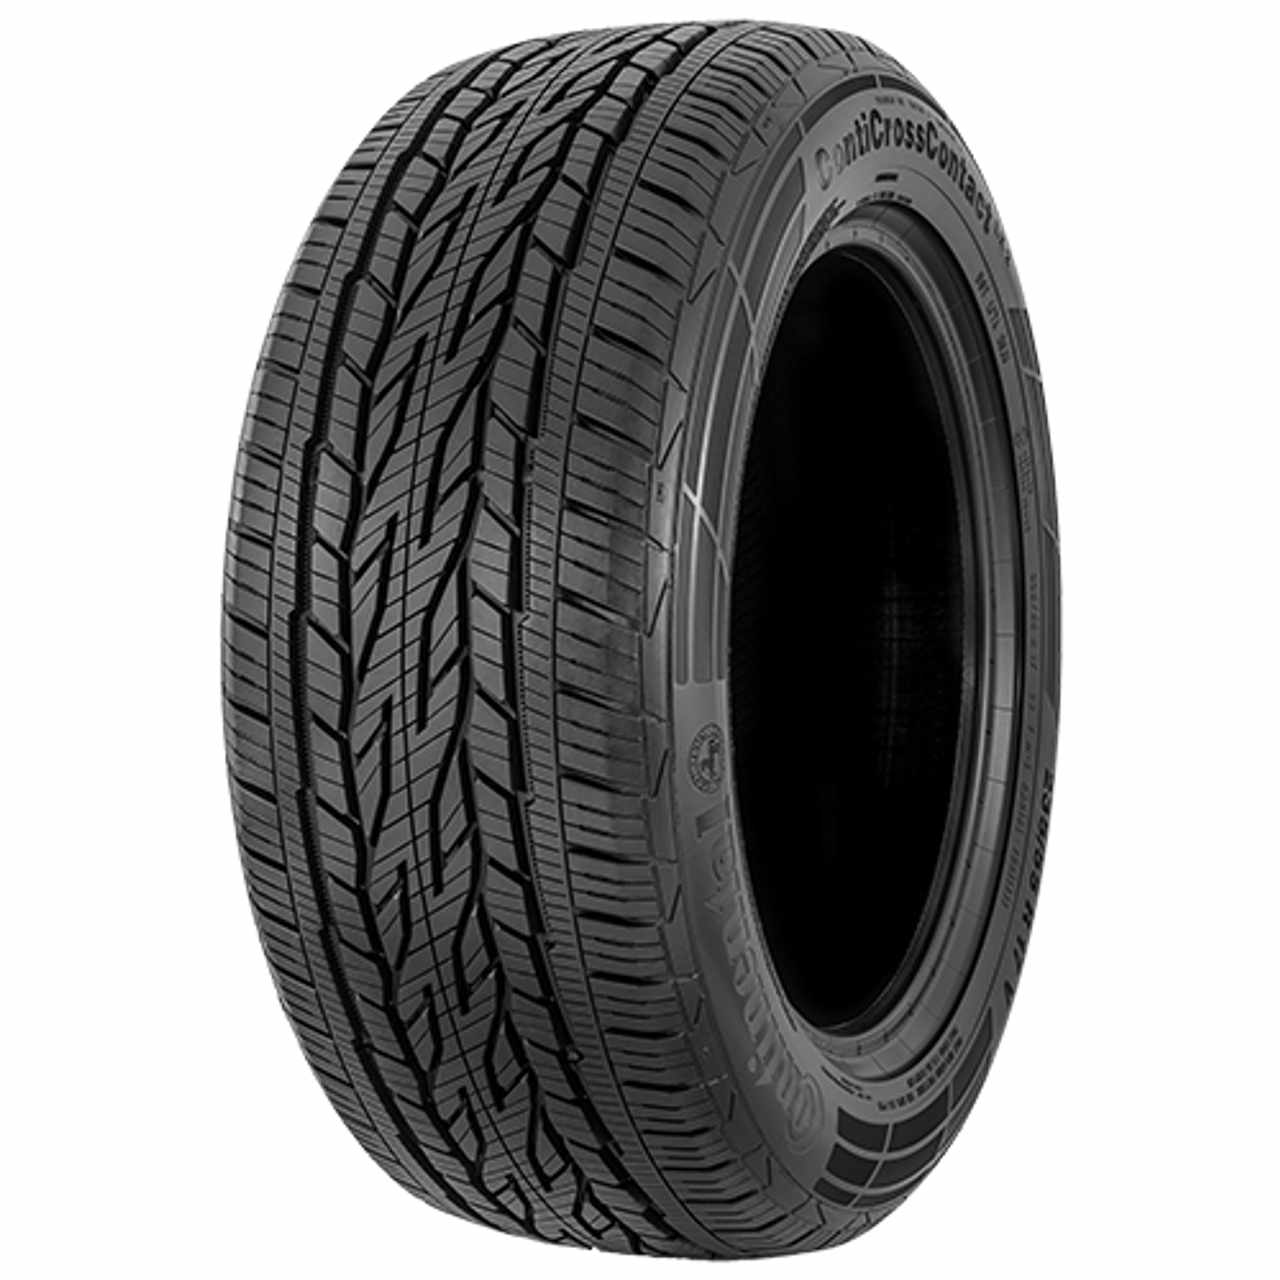 CONTINENTAL CONTICROSSCONTACT LX 2 (EVc) 285/60R18 116V FR BSW